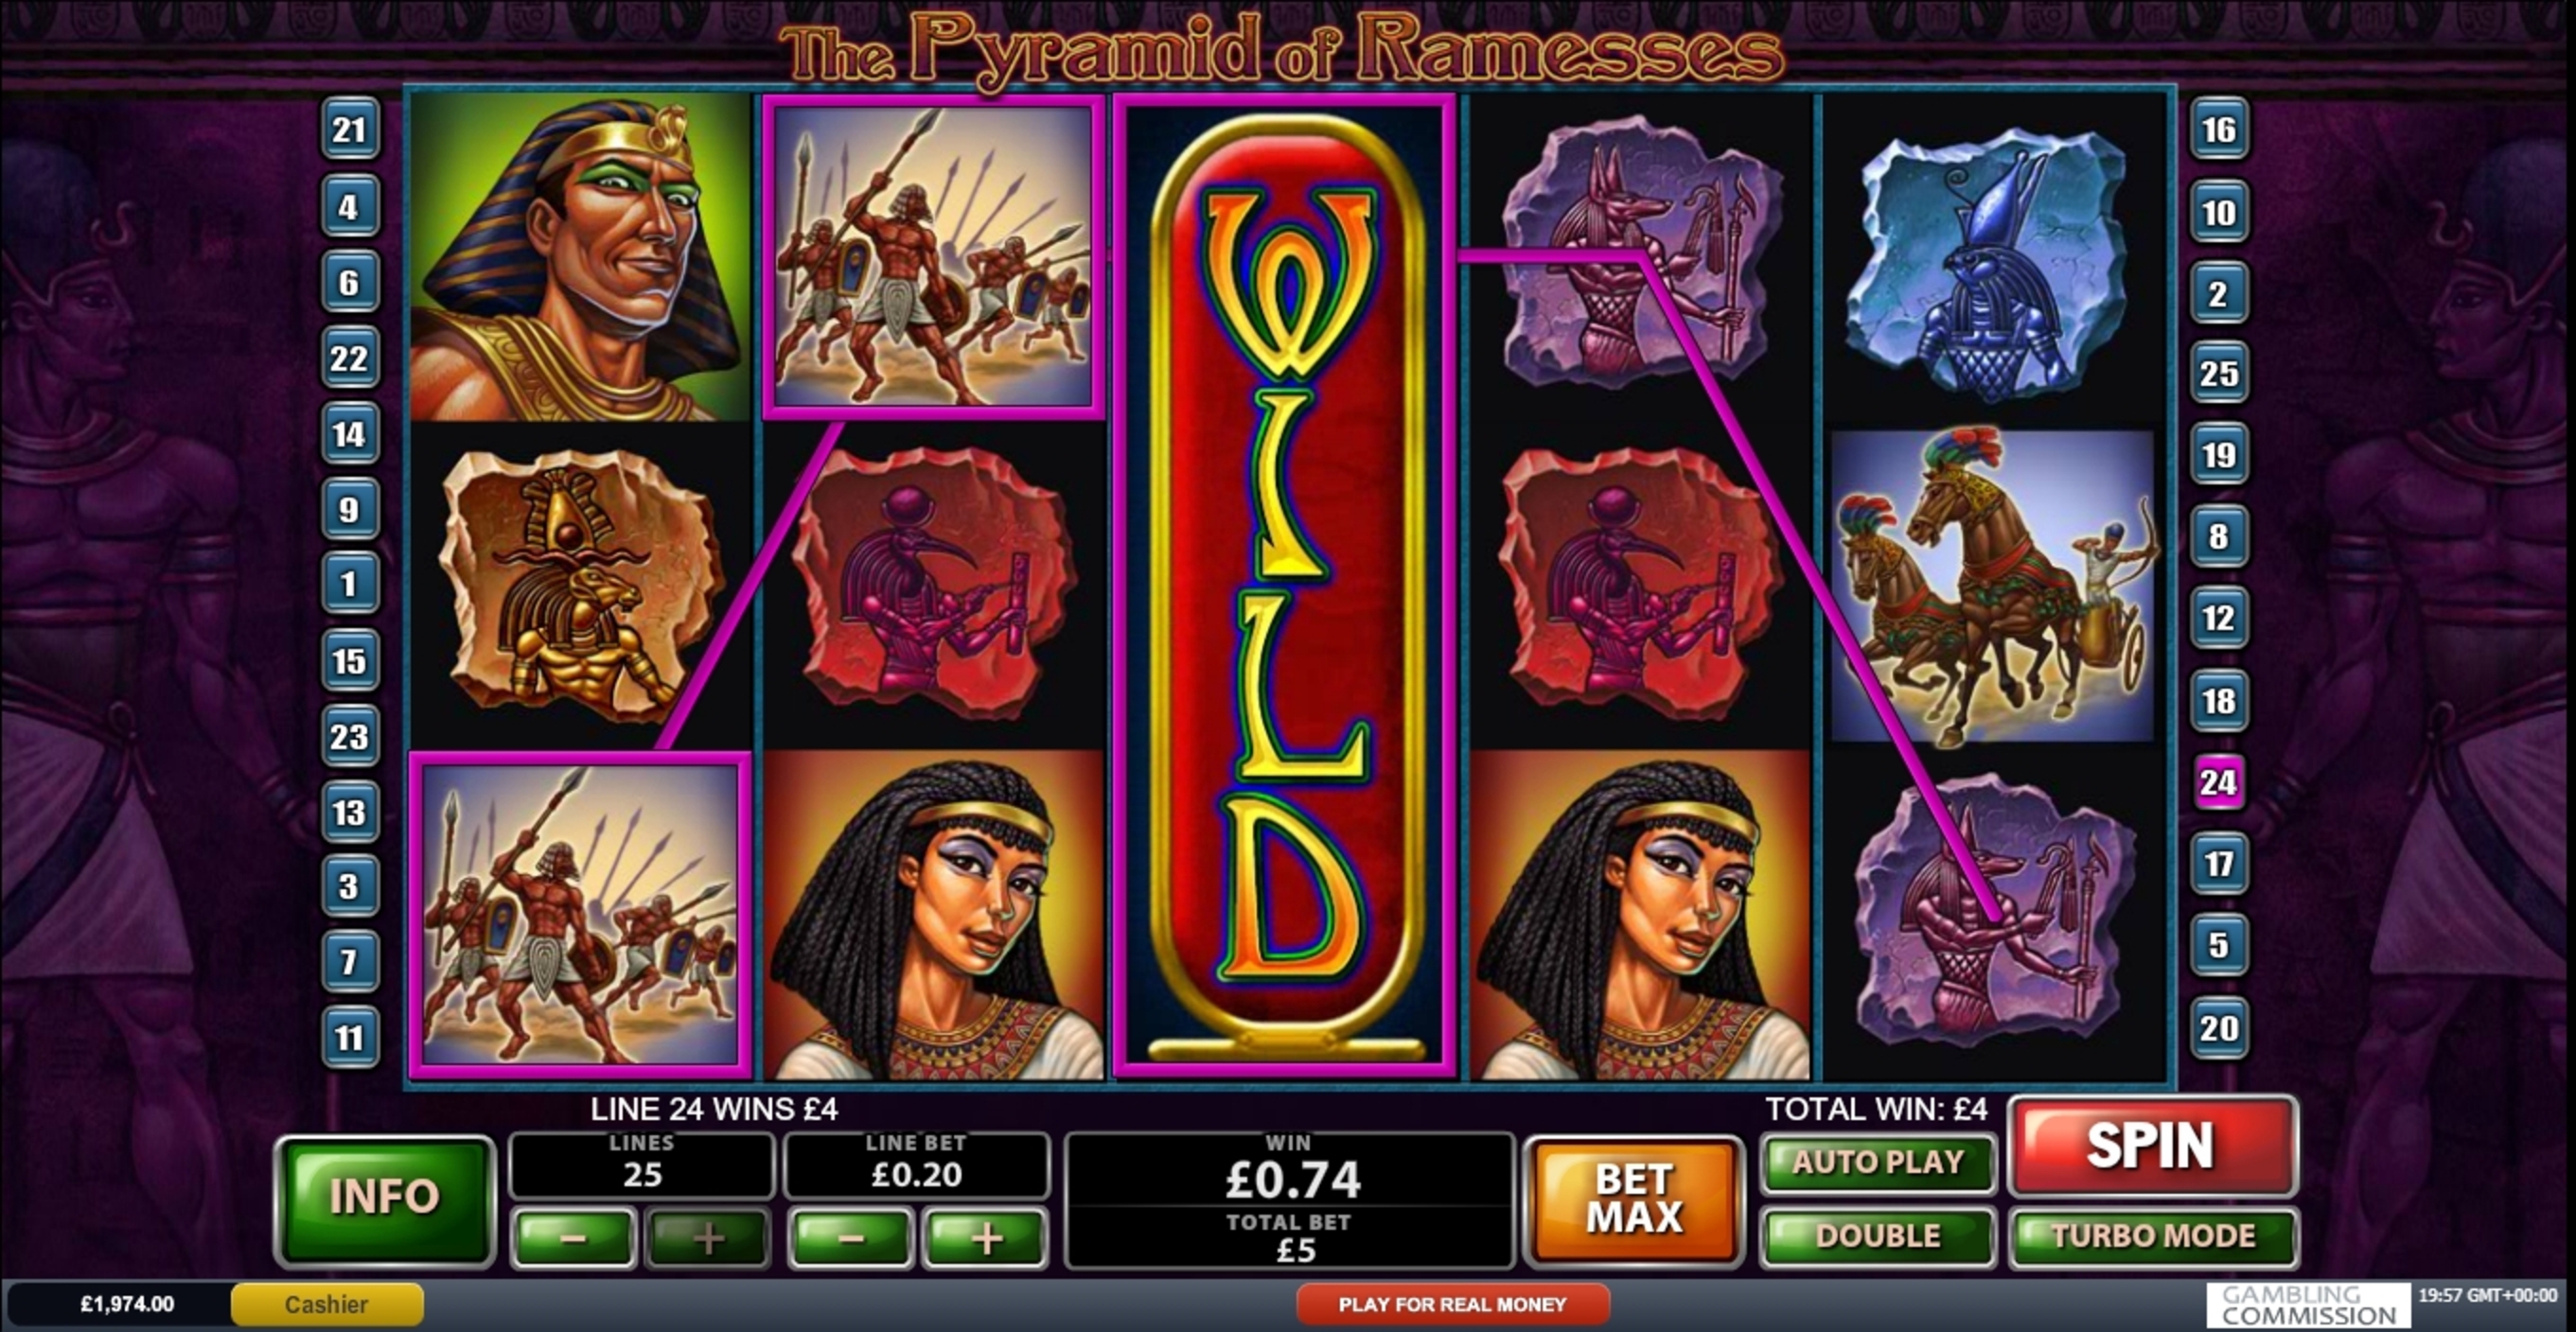 Win Money in The Pyramid of Ramesses Free Slot Game by Playtech